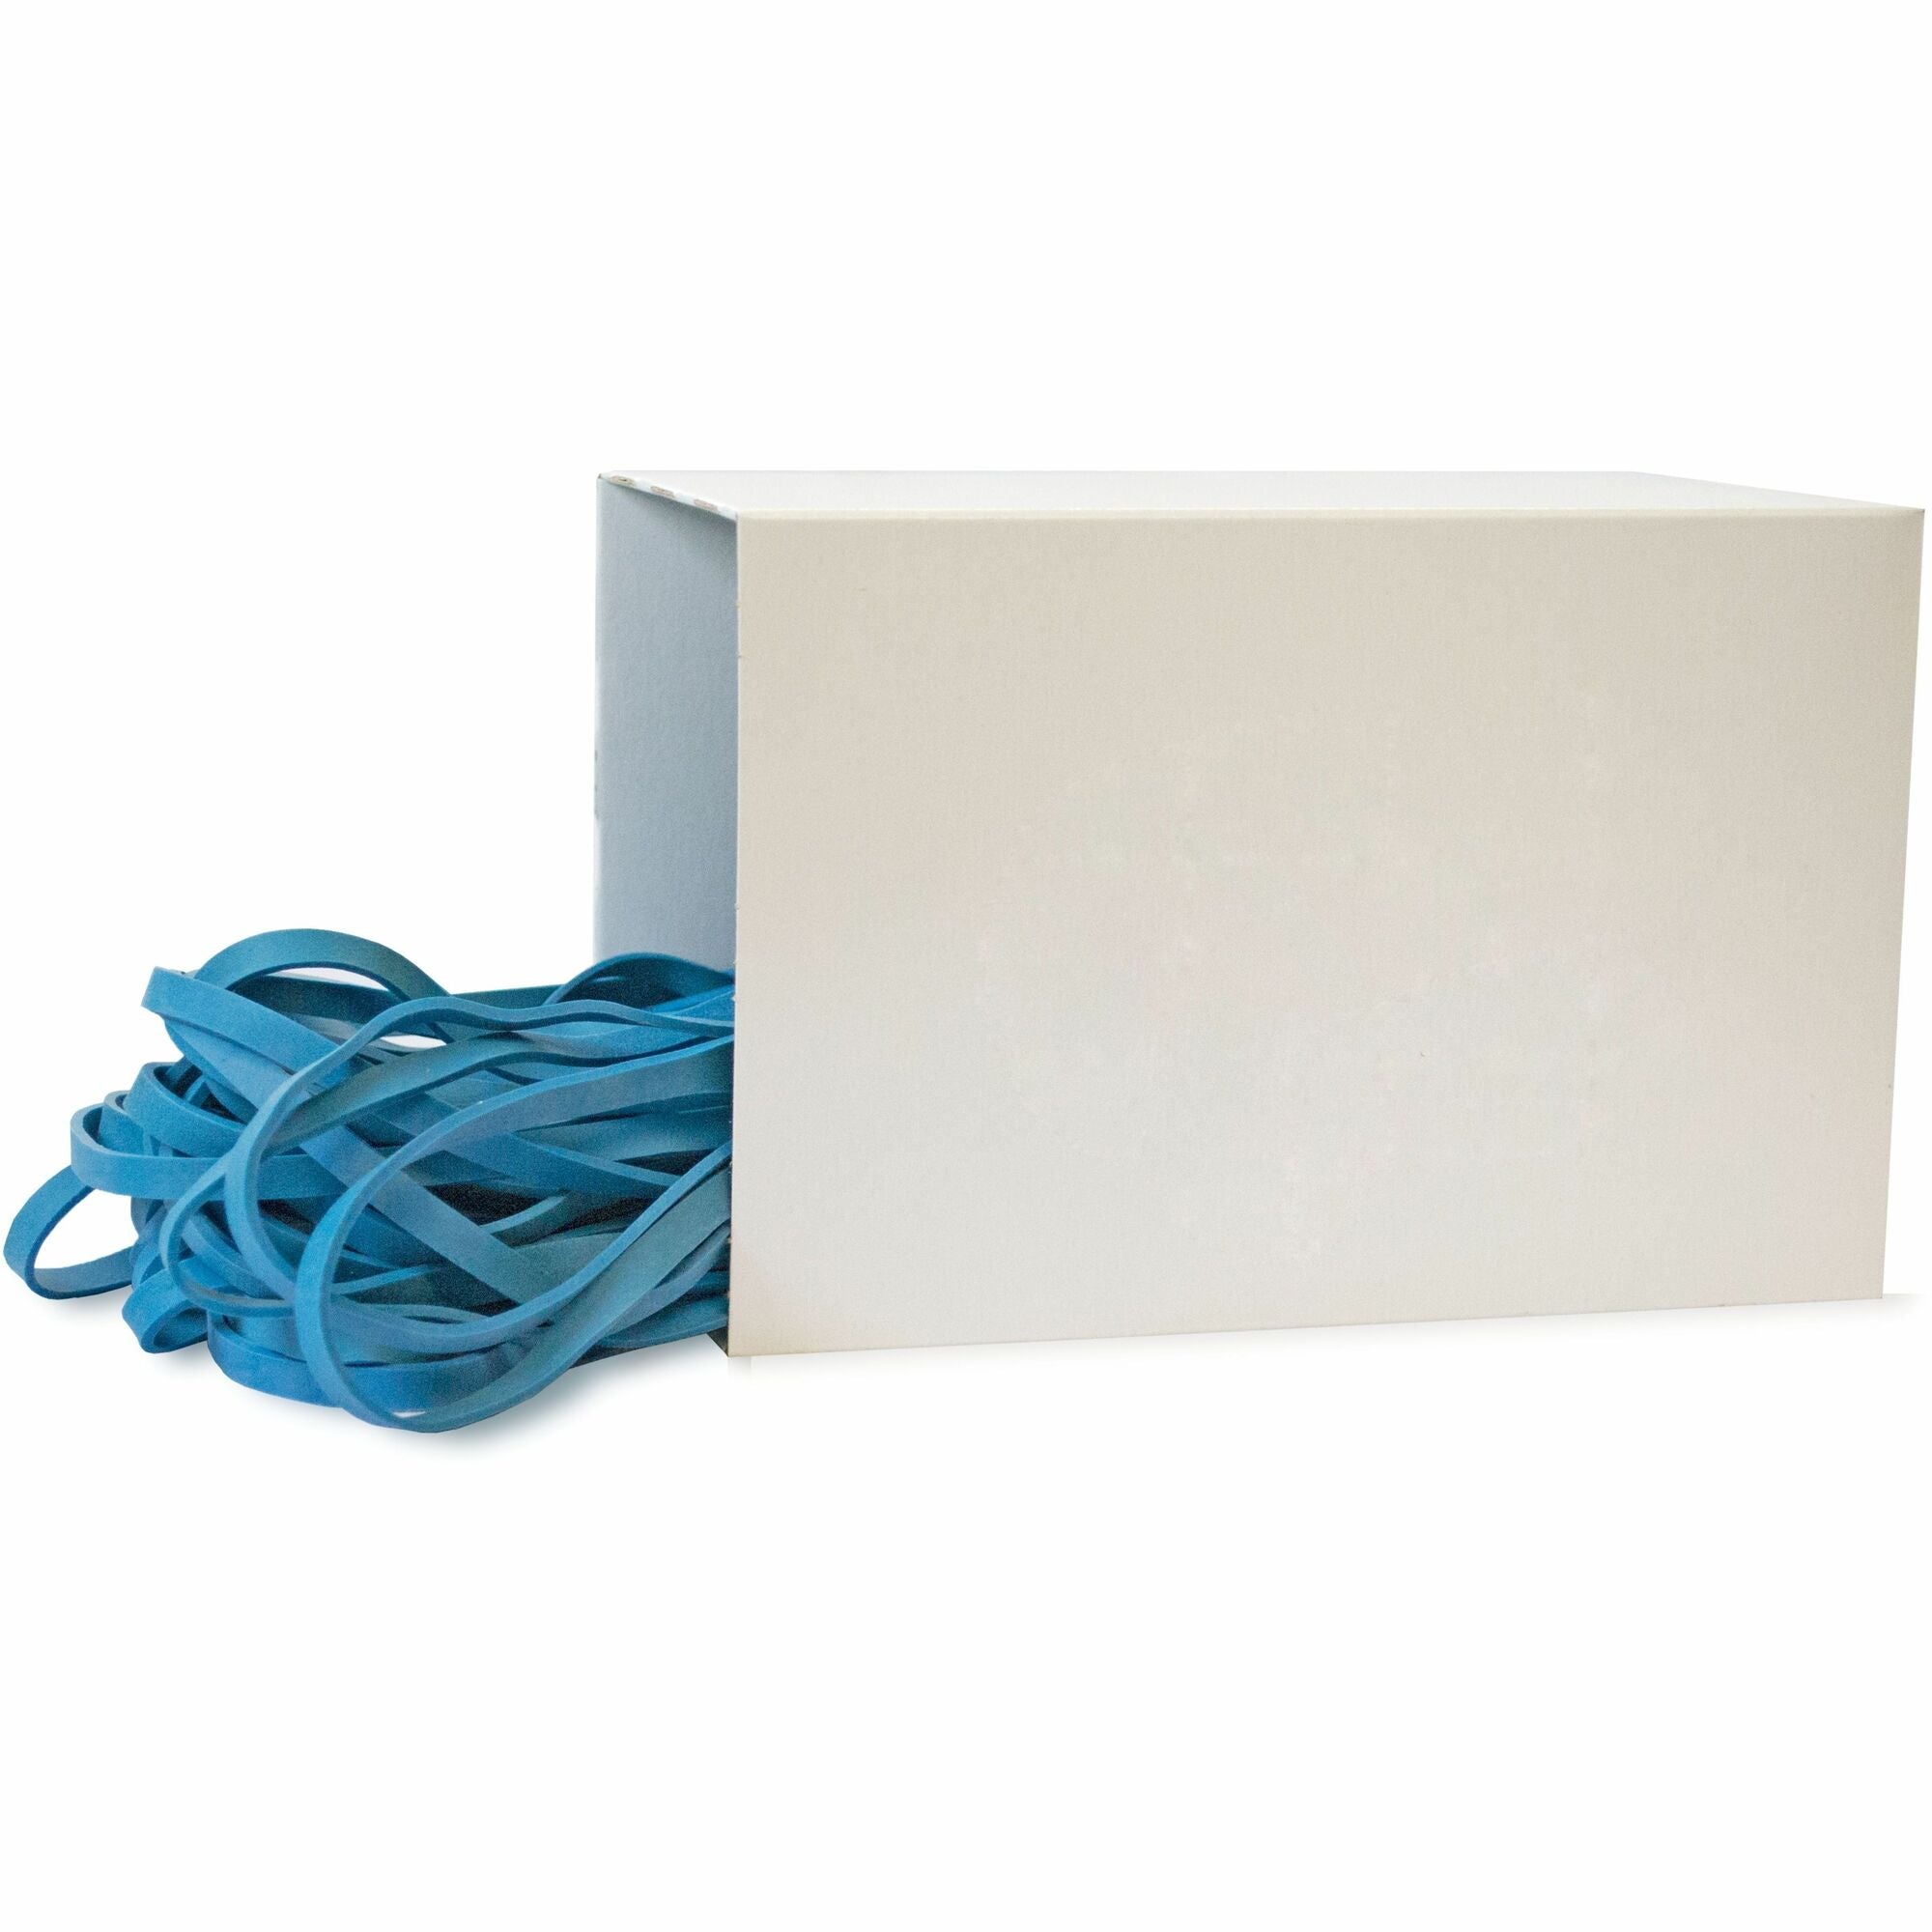 Alliance Rubber 07818 SuperSize Bands - Large 17" Heavy Duty Latex Rubber Bands - For Oversized Jobs - Blue - Approx. 50 Bands in Box - 